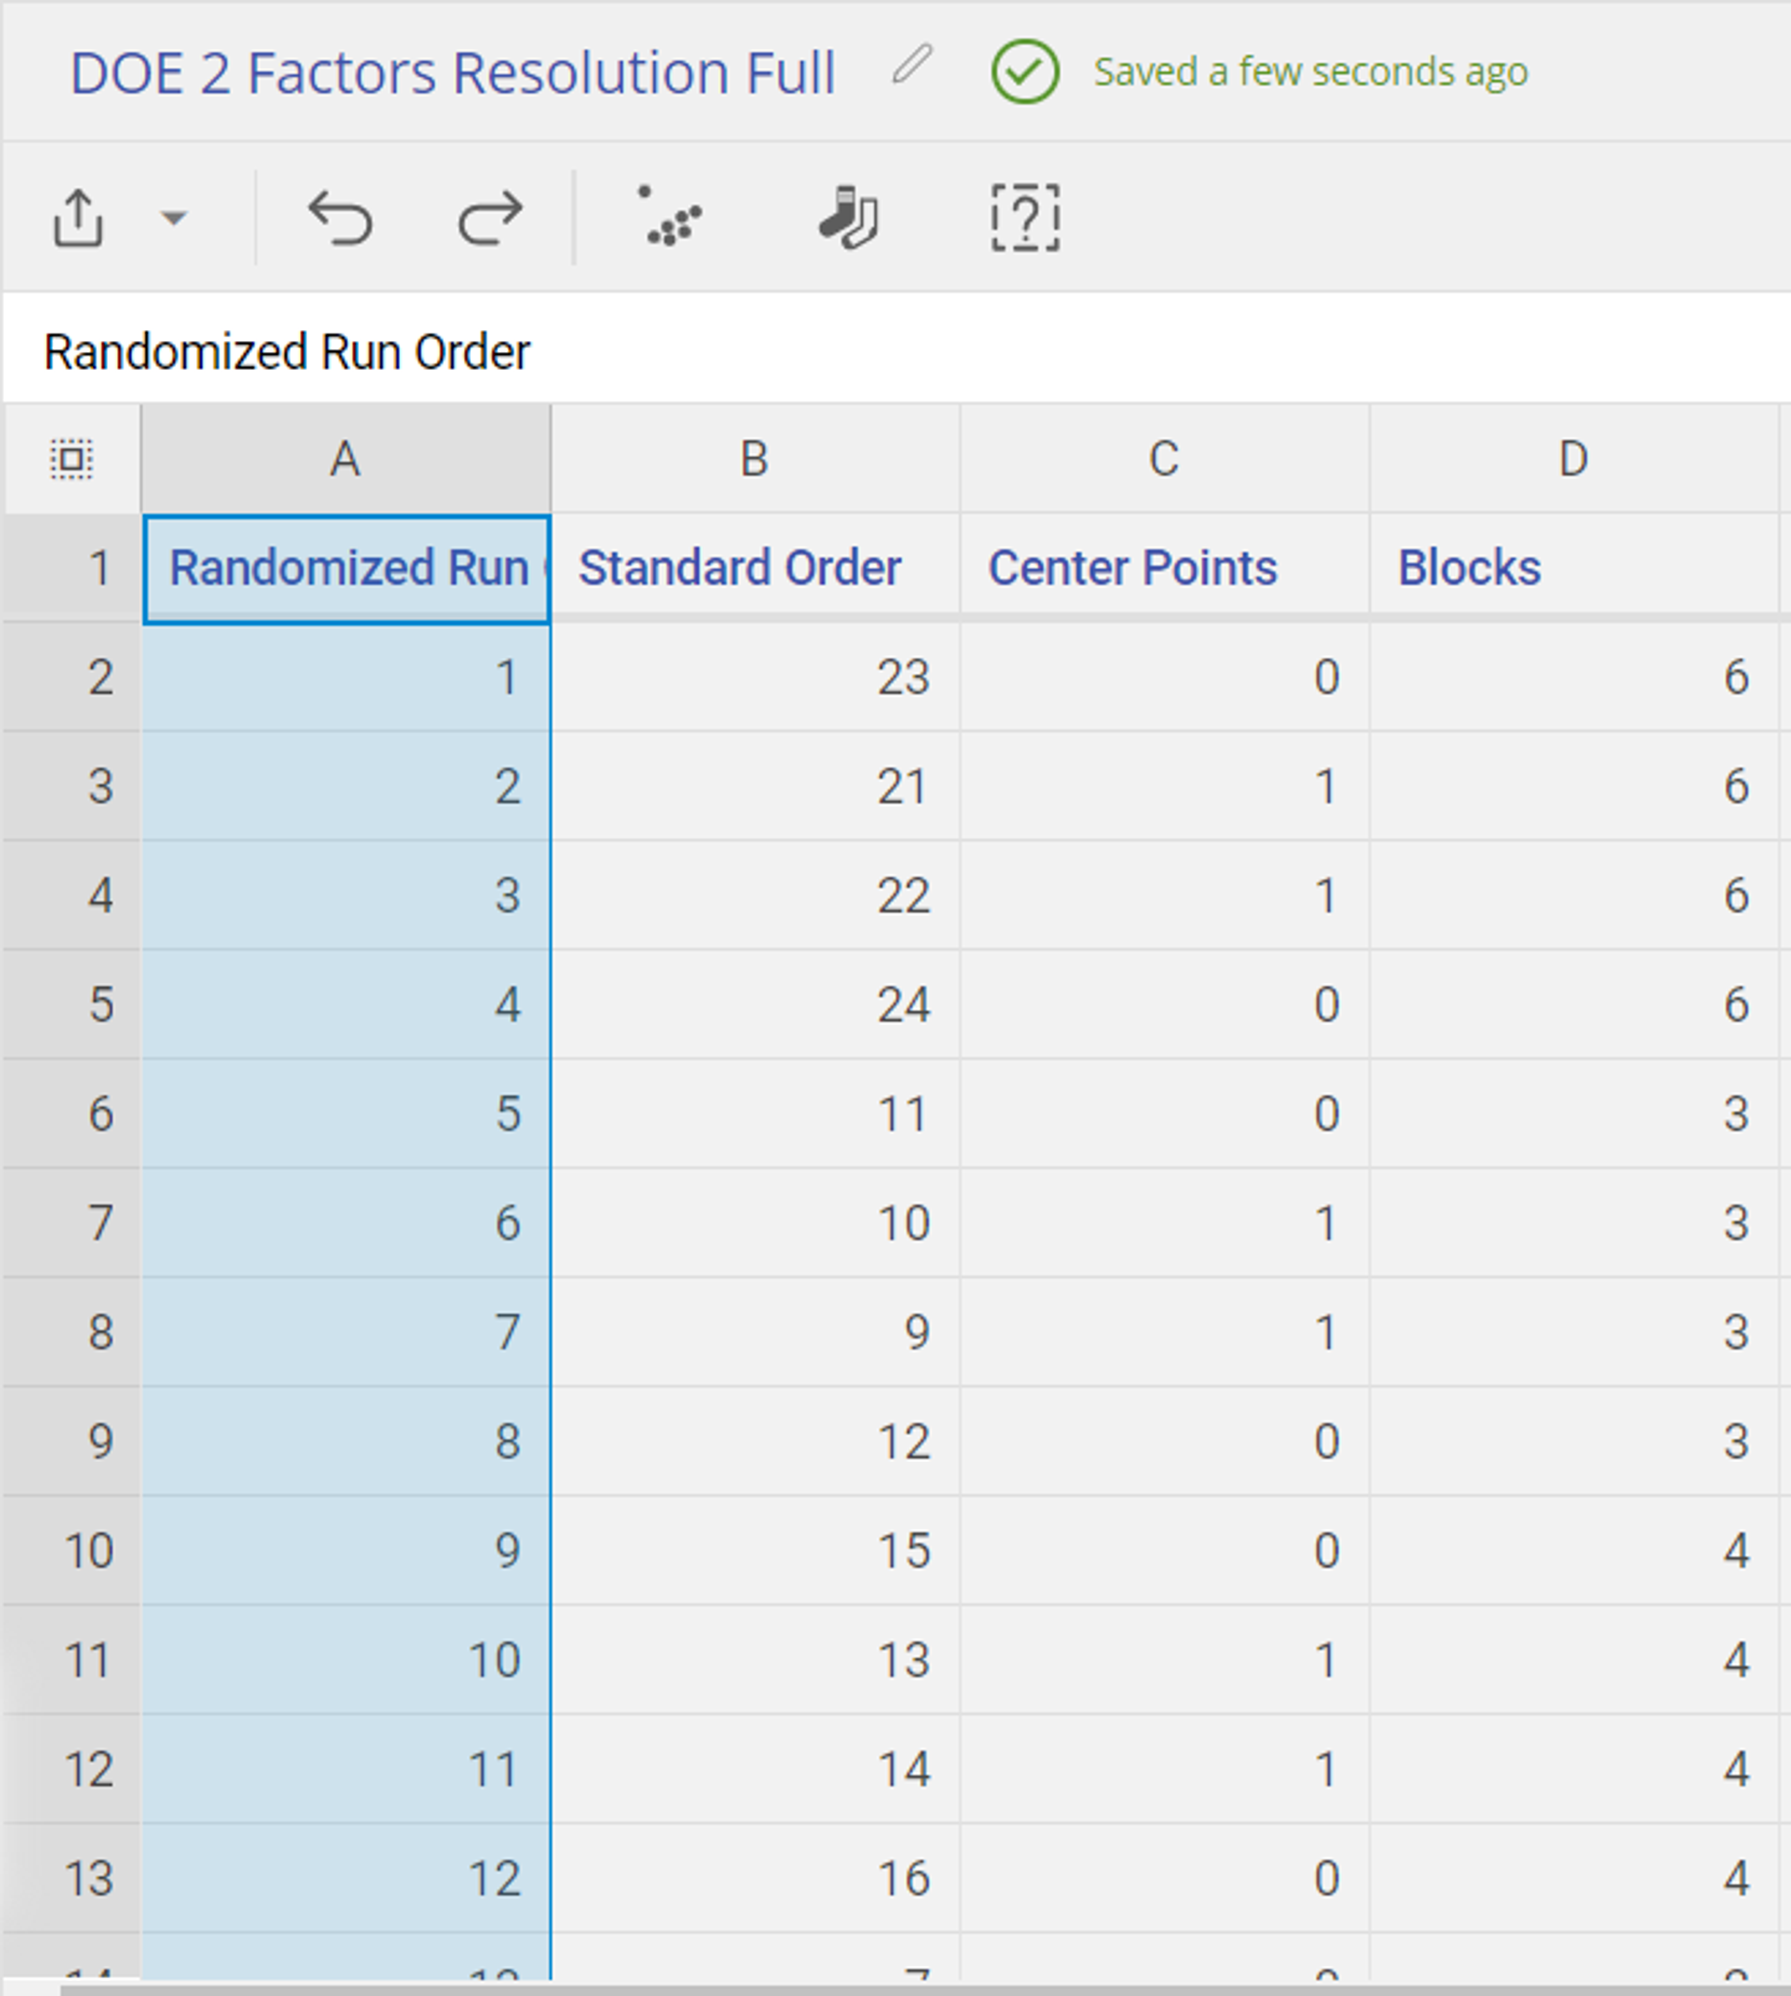 Data editor with Randomized Run Order highlighted and sorted in numeric order